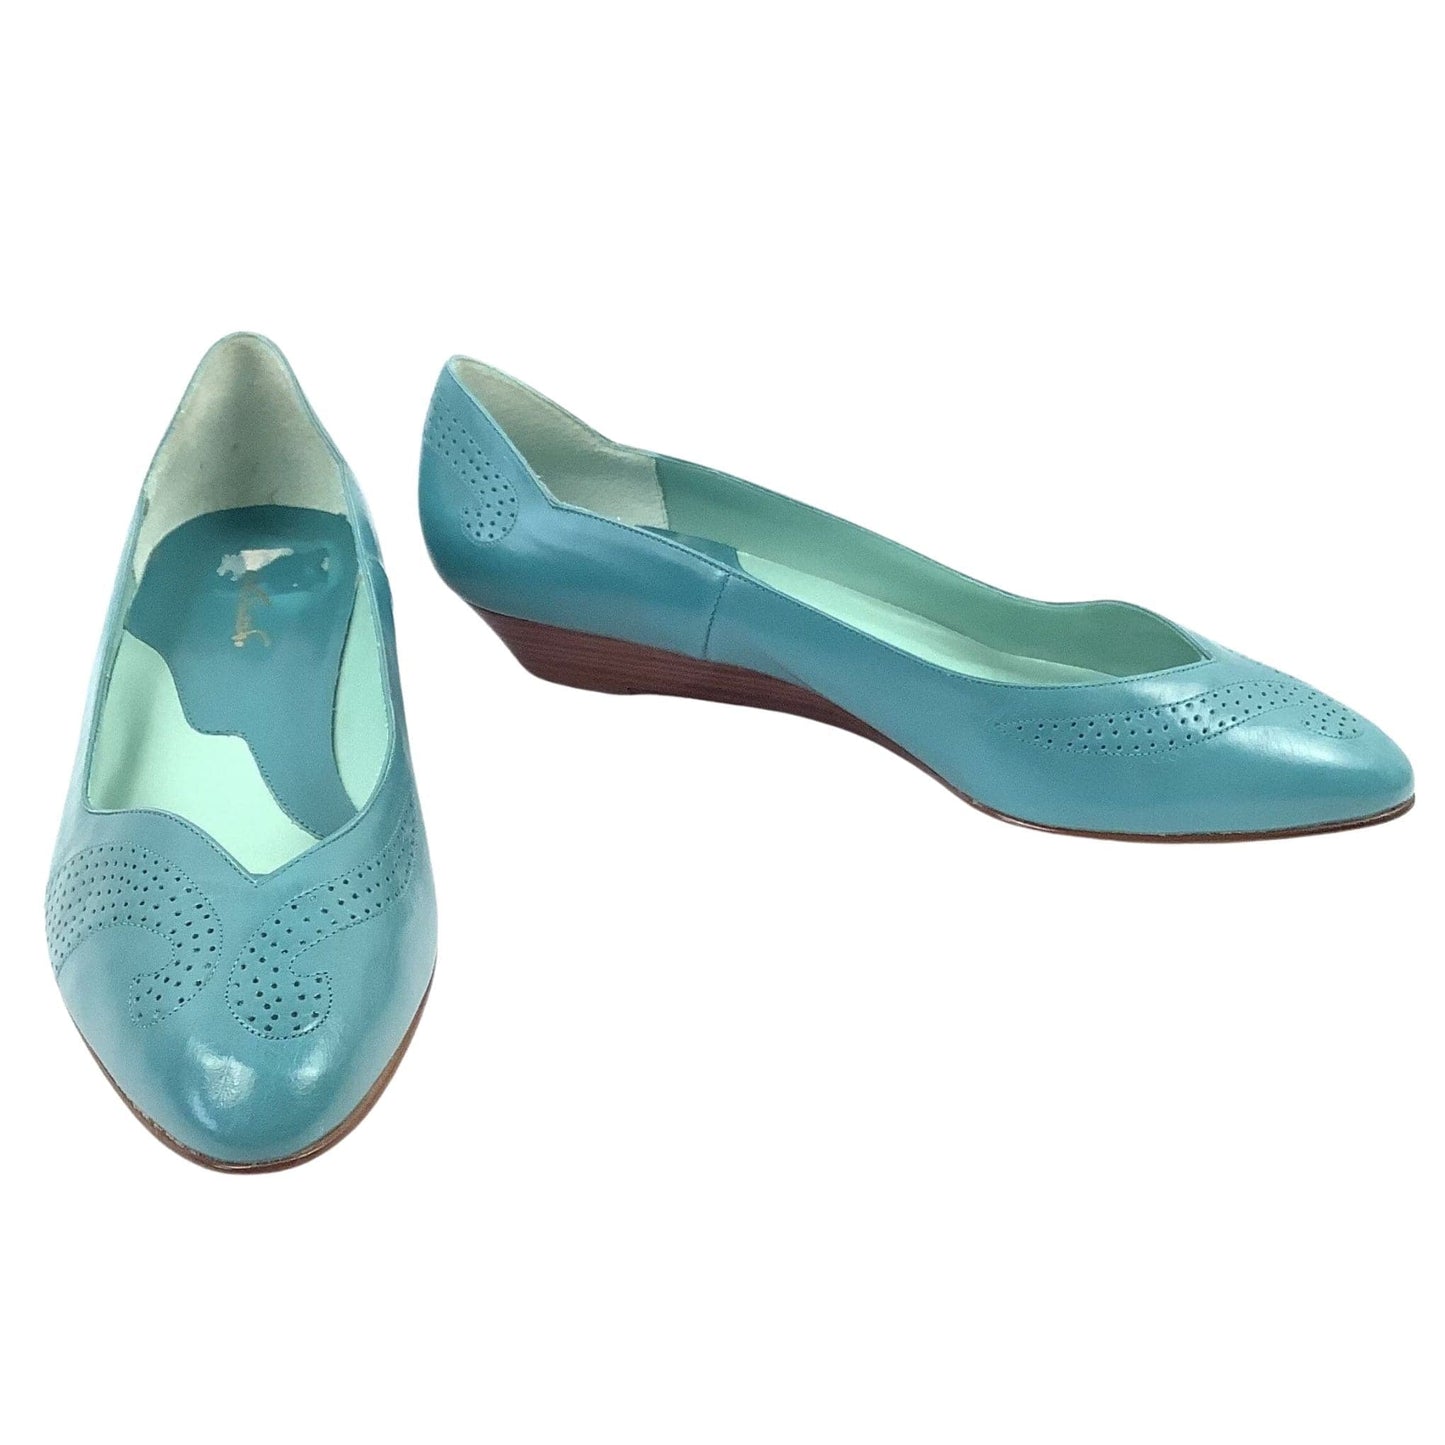 1980s Teal Flat Shoes 8 / Teal Blue / Classic